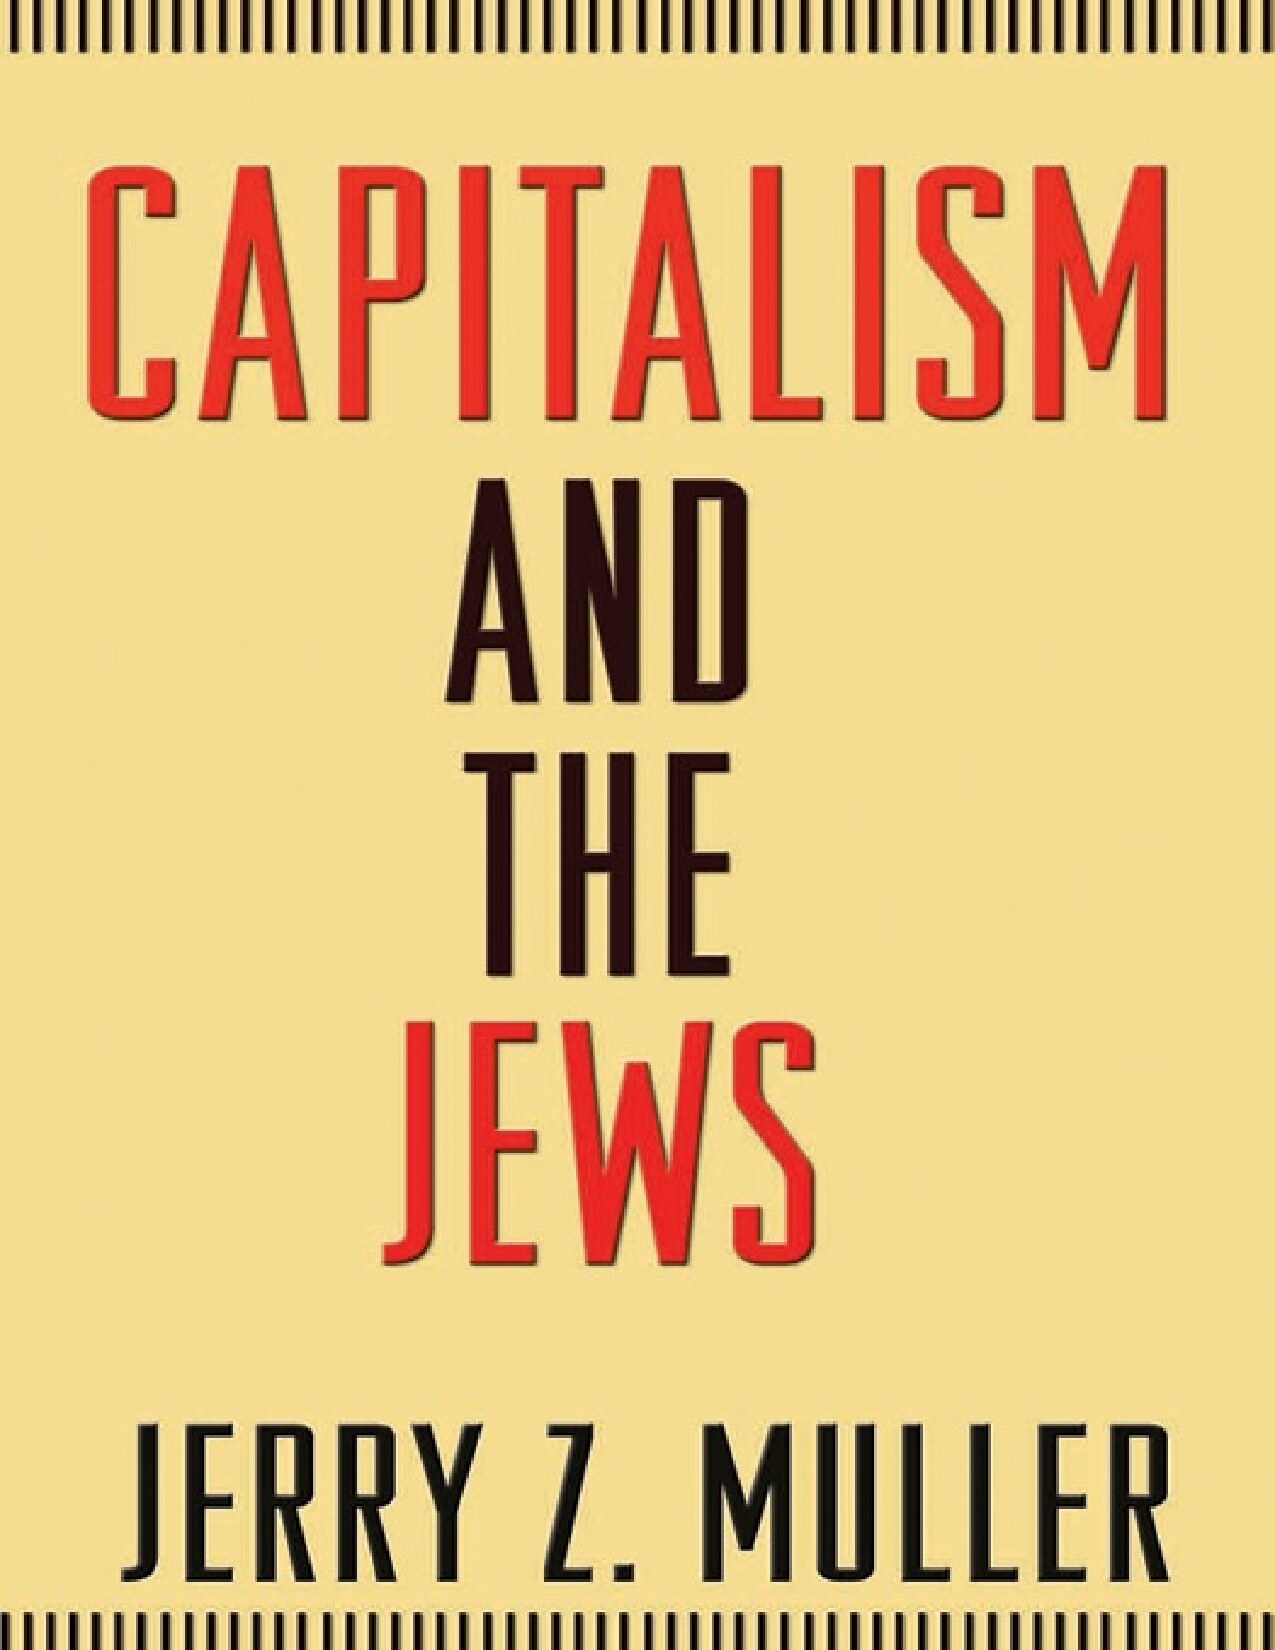 Capitalism and the Jews